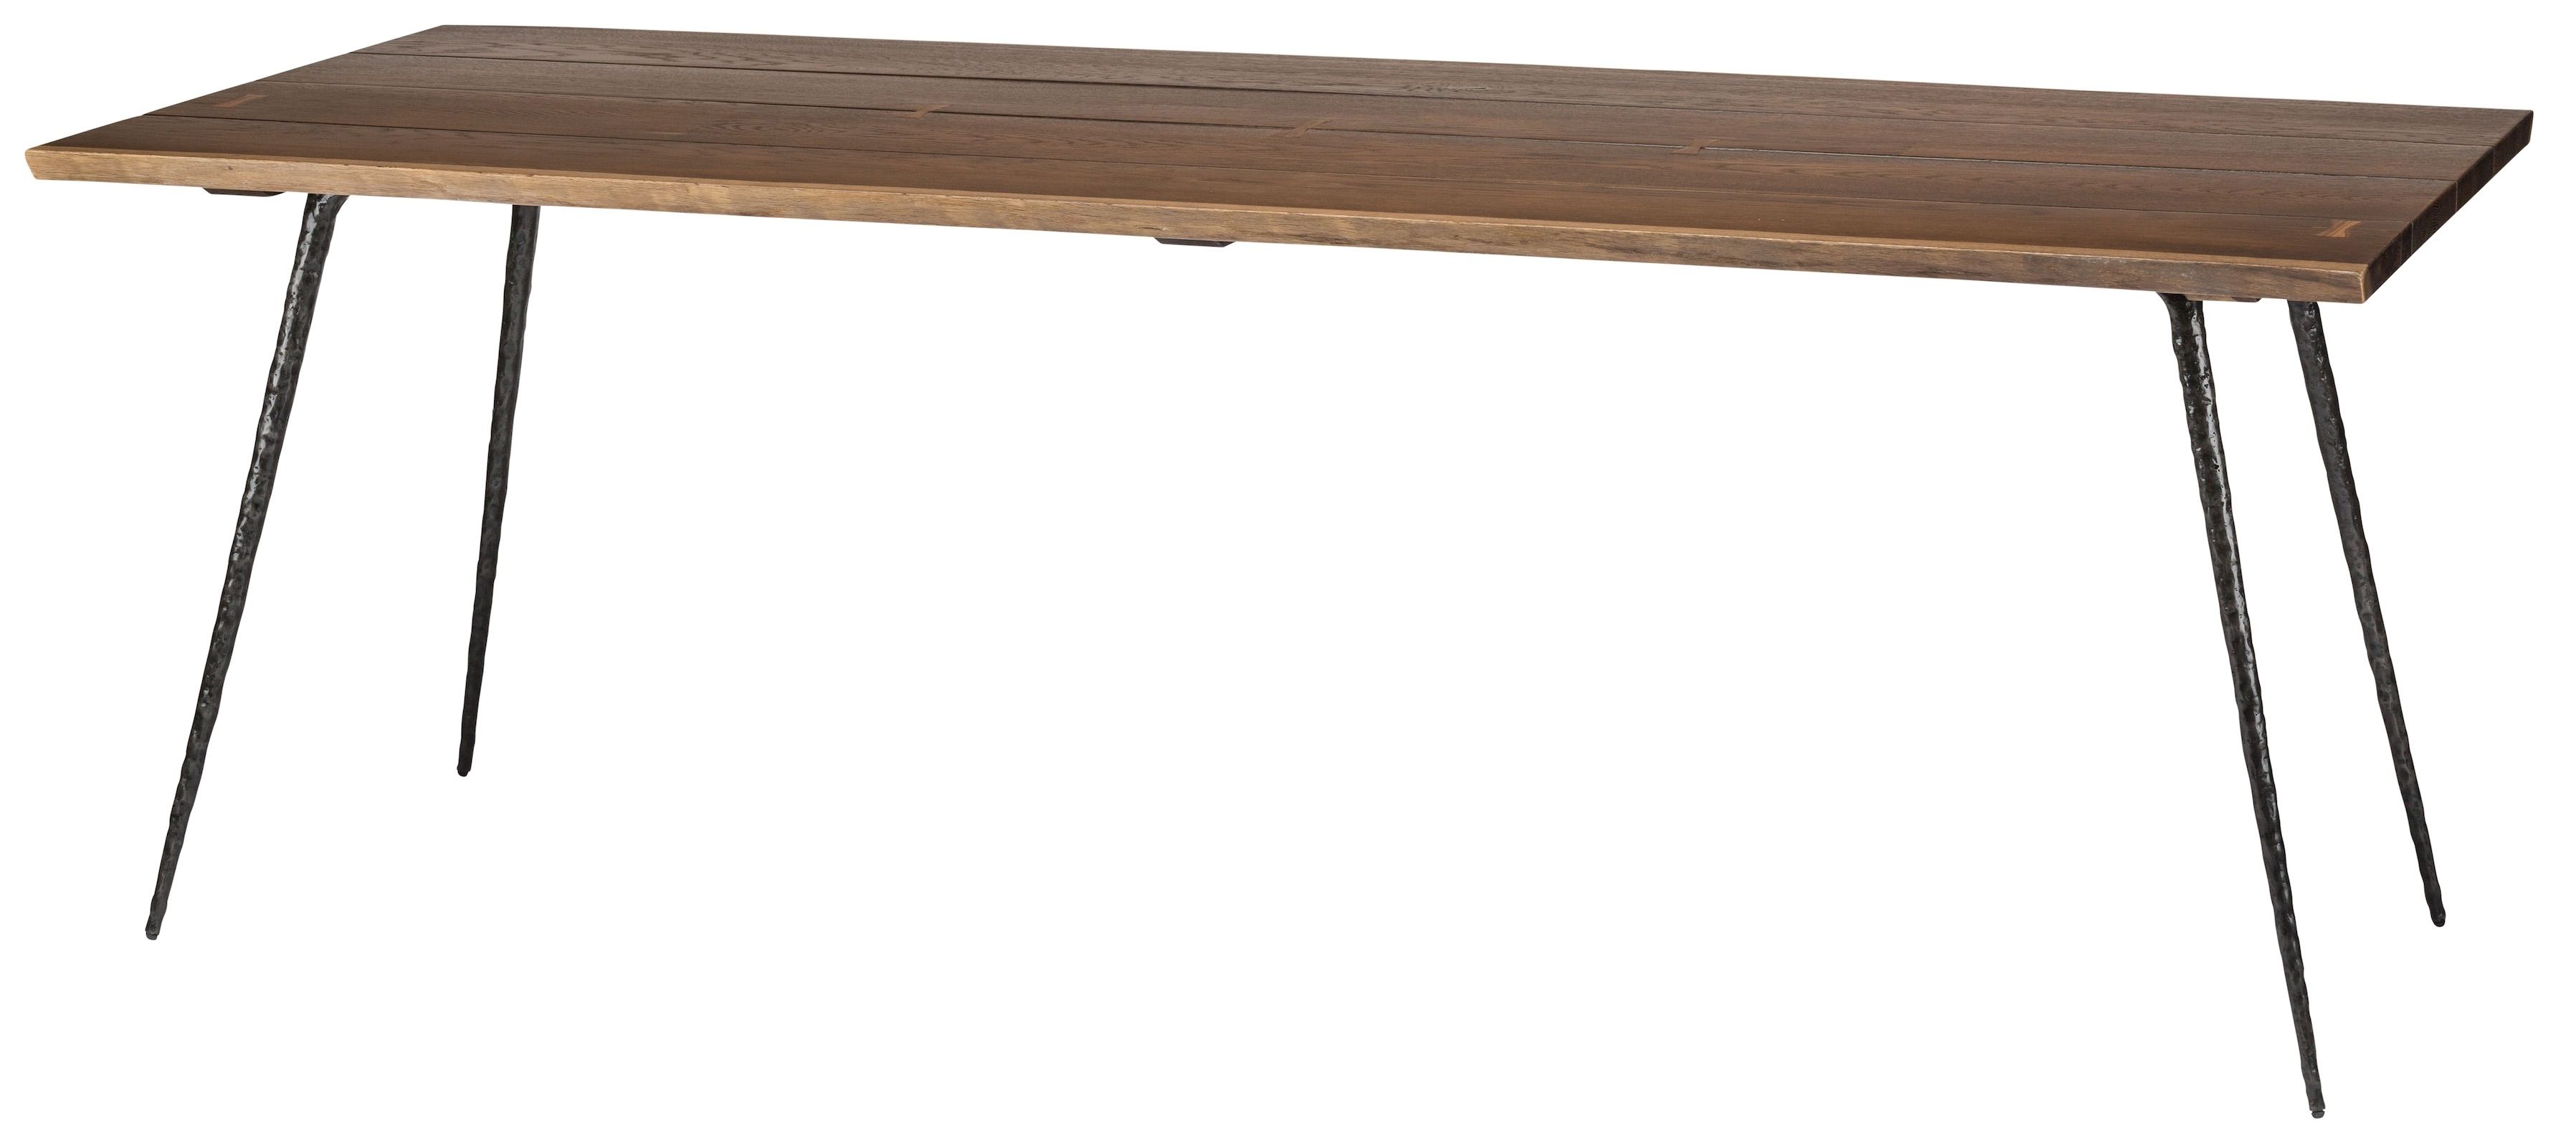 Nexa 78 Inch Dining Table In Seared Oaknuevo – Hgsr651 In Newest Portland 78 Inch Dining Tables (View 16 of 20)